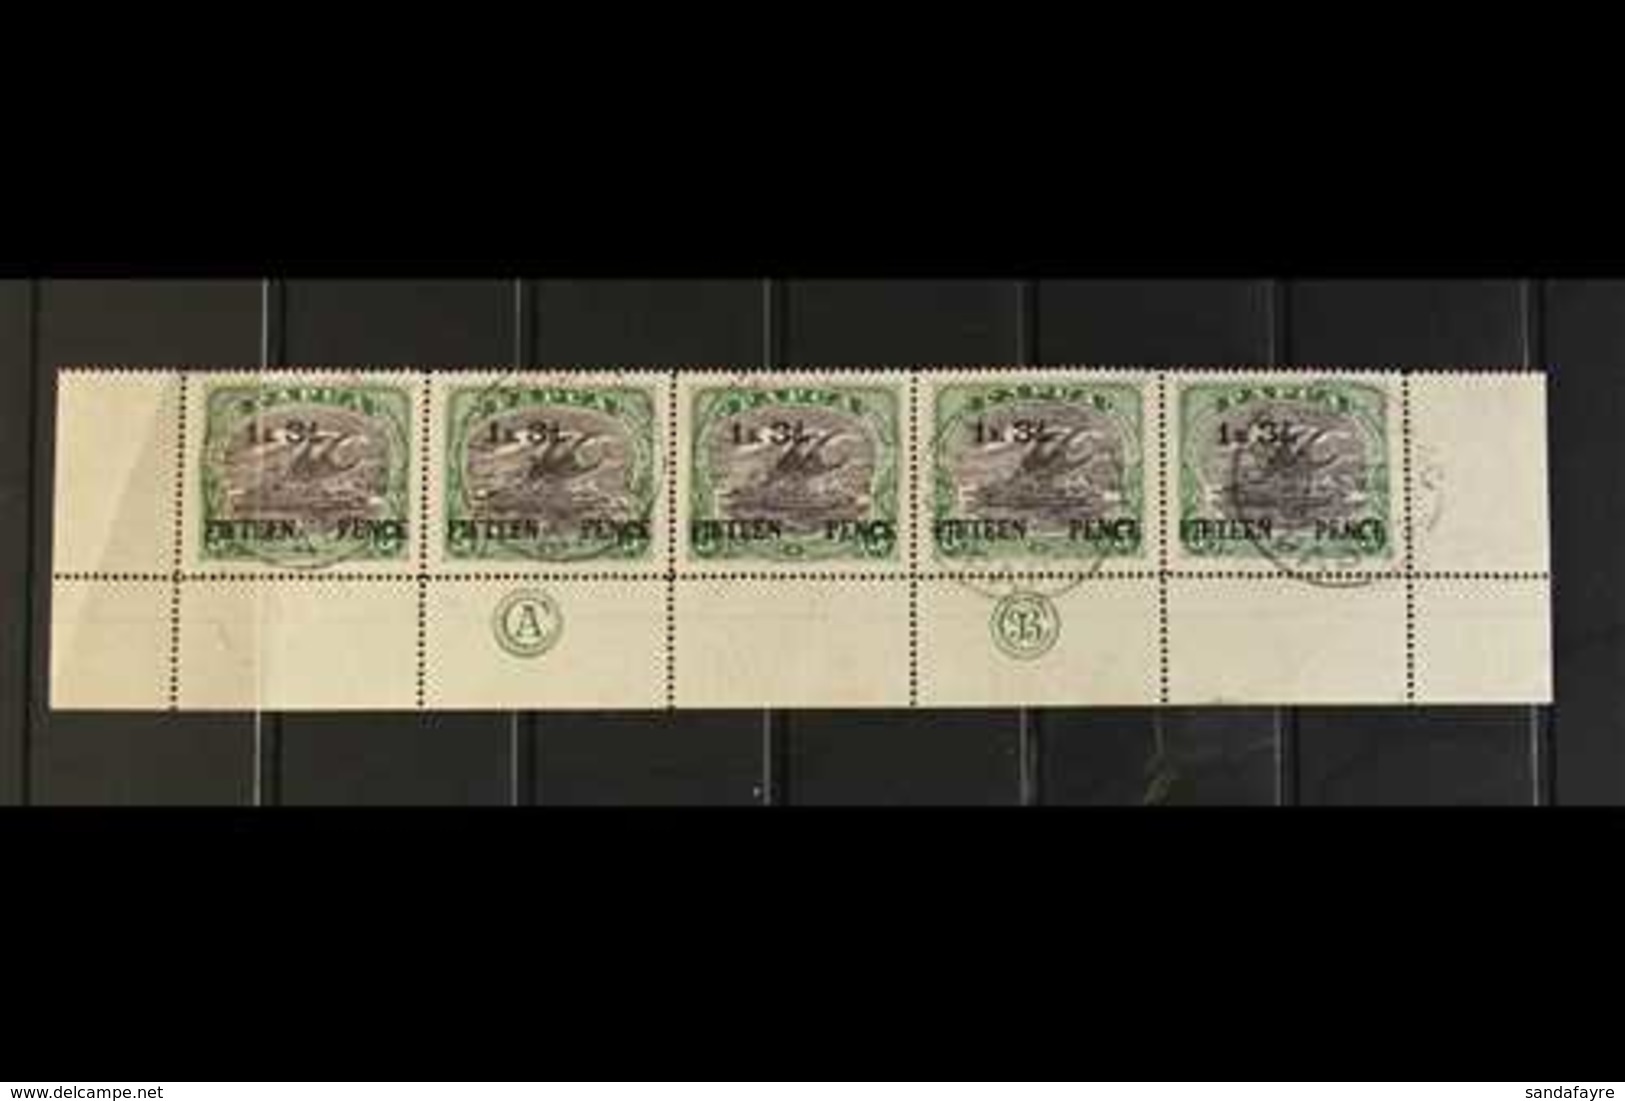 1931 1s3d On 5s Black And Deep Green, SG 123, Complete Lower Row Of The Sheet Showing JBC Imprint, Fine Port Moresby Cds - Papoea-Nieuw-Guinea